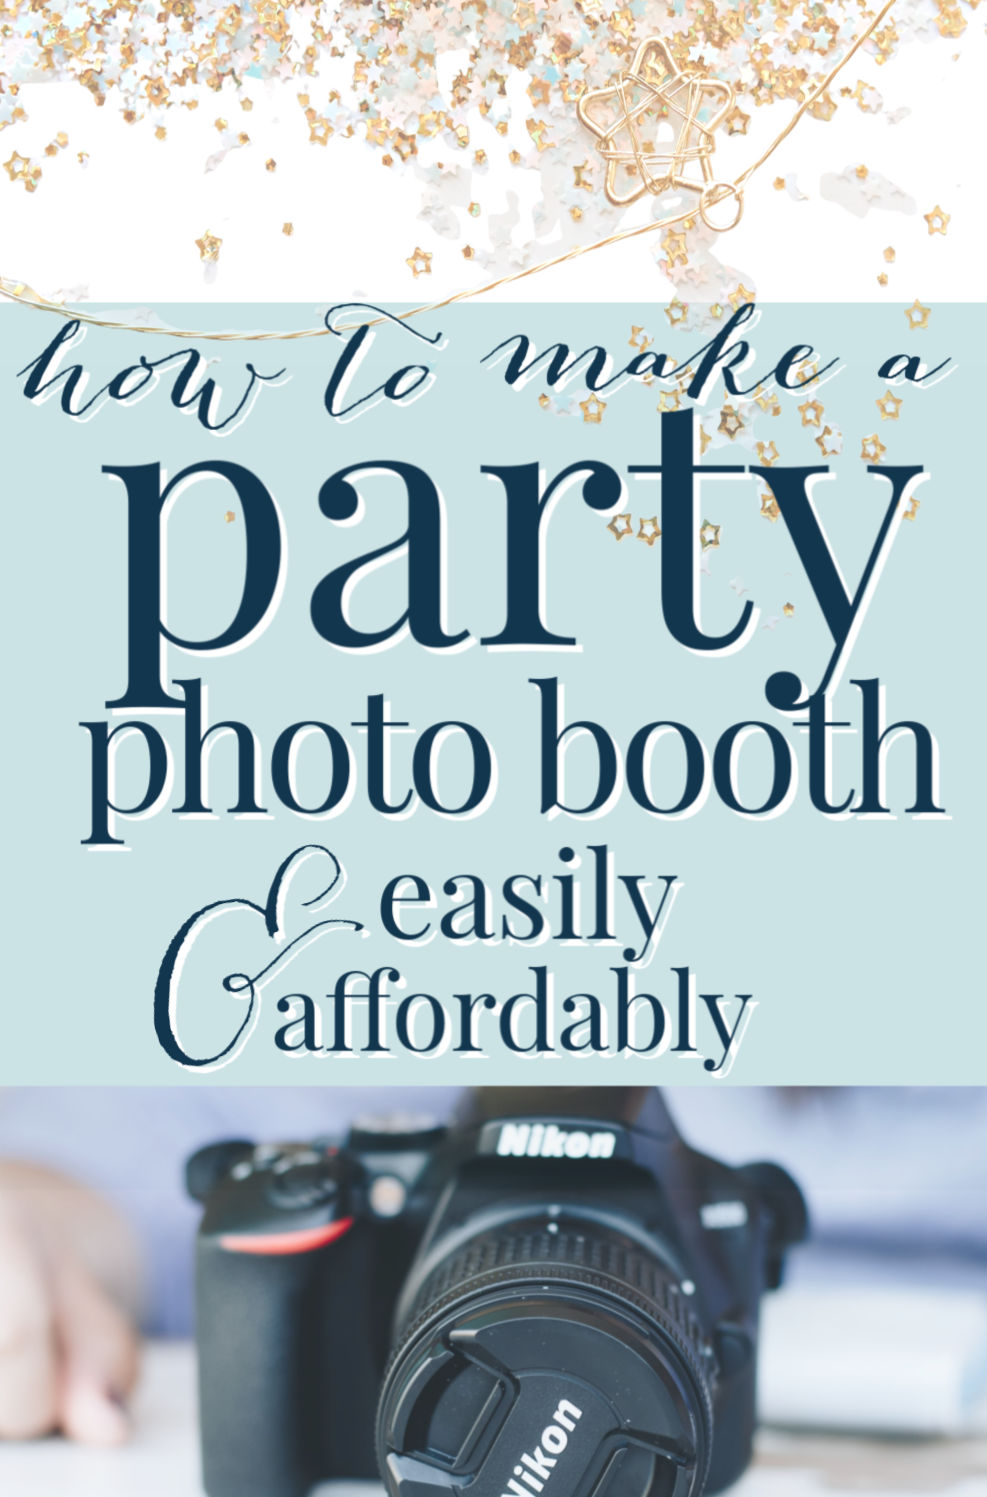 DIY - NEW YEAR Photo Booth Prop Frame UNDER $3, Dollar Tree selfie booth